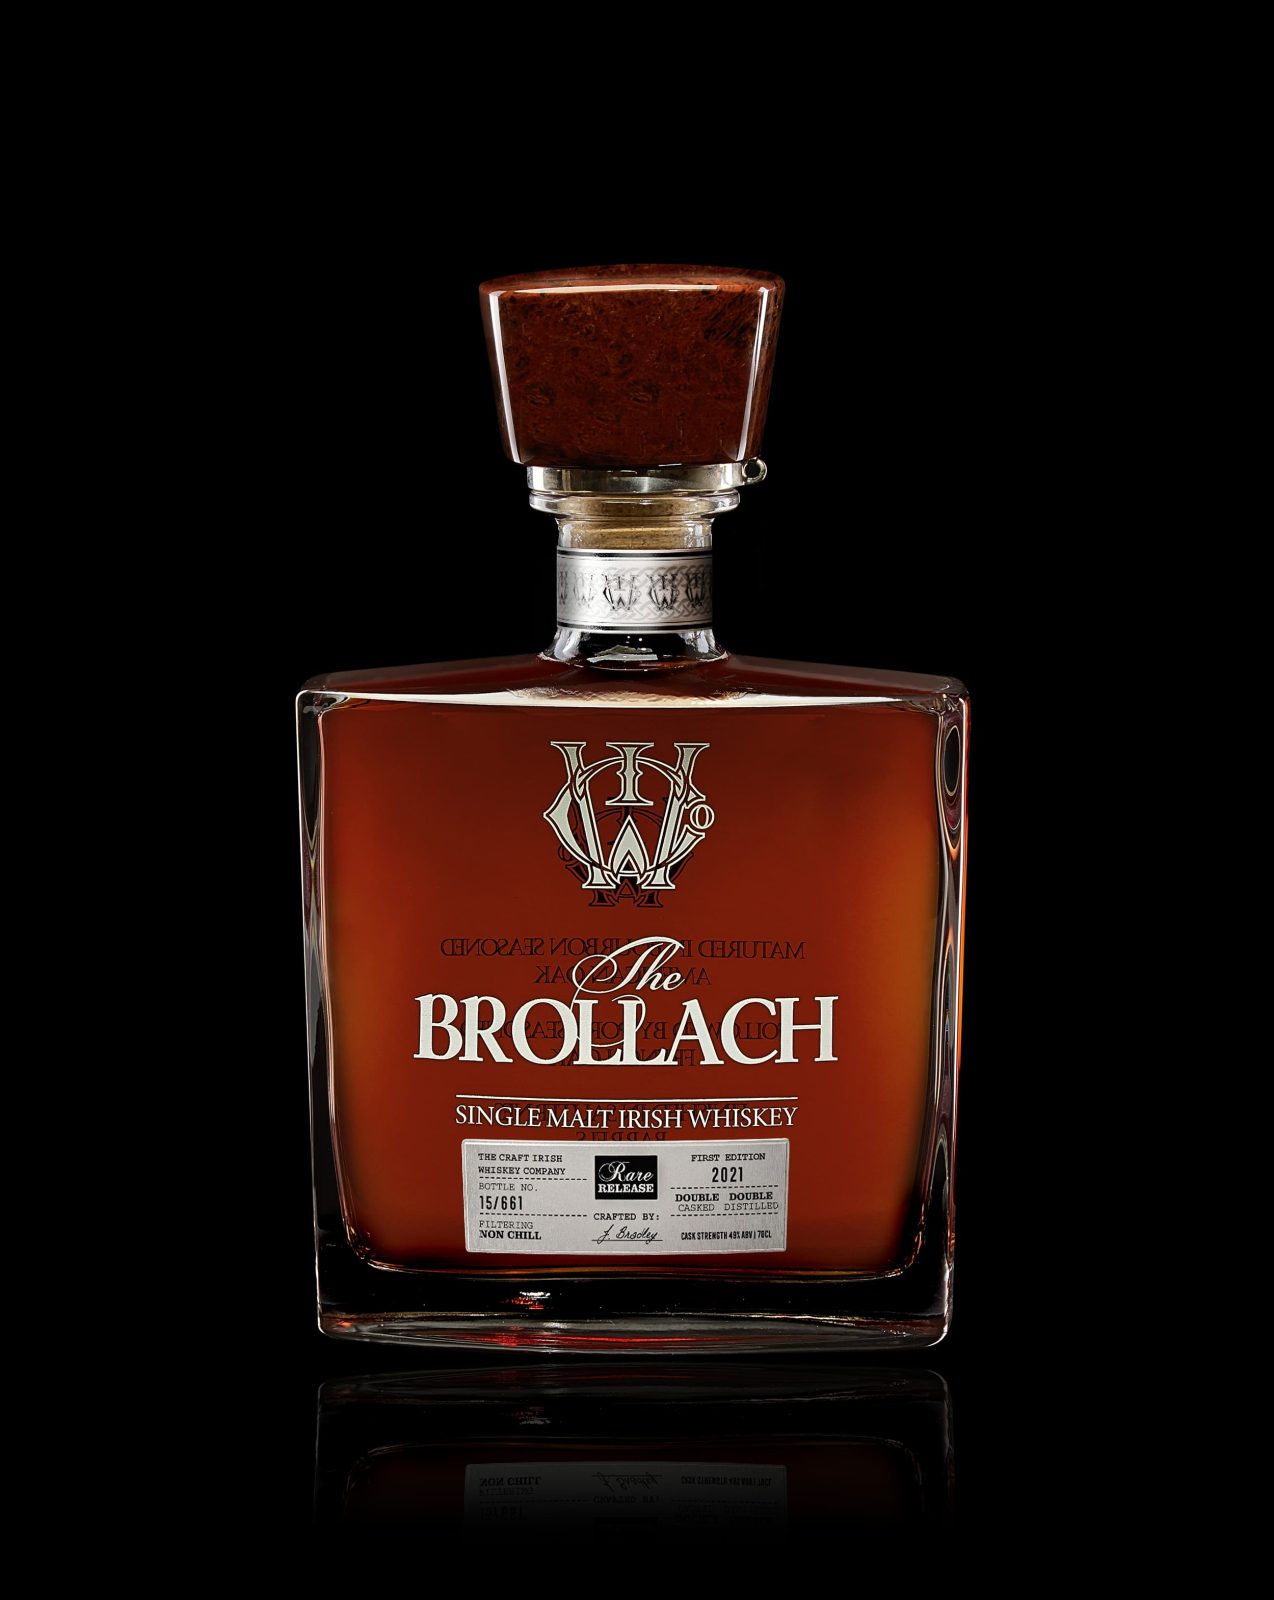 The Brollach Packaging Design